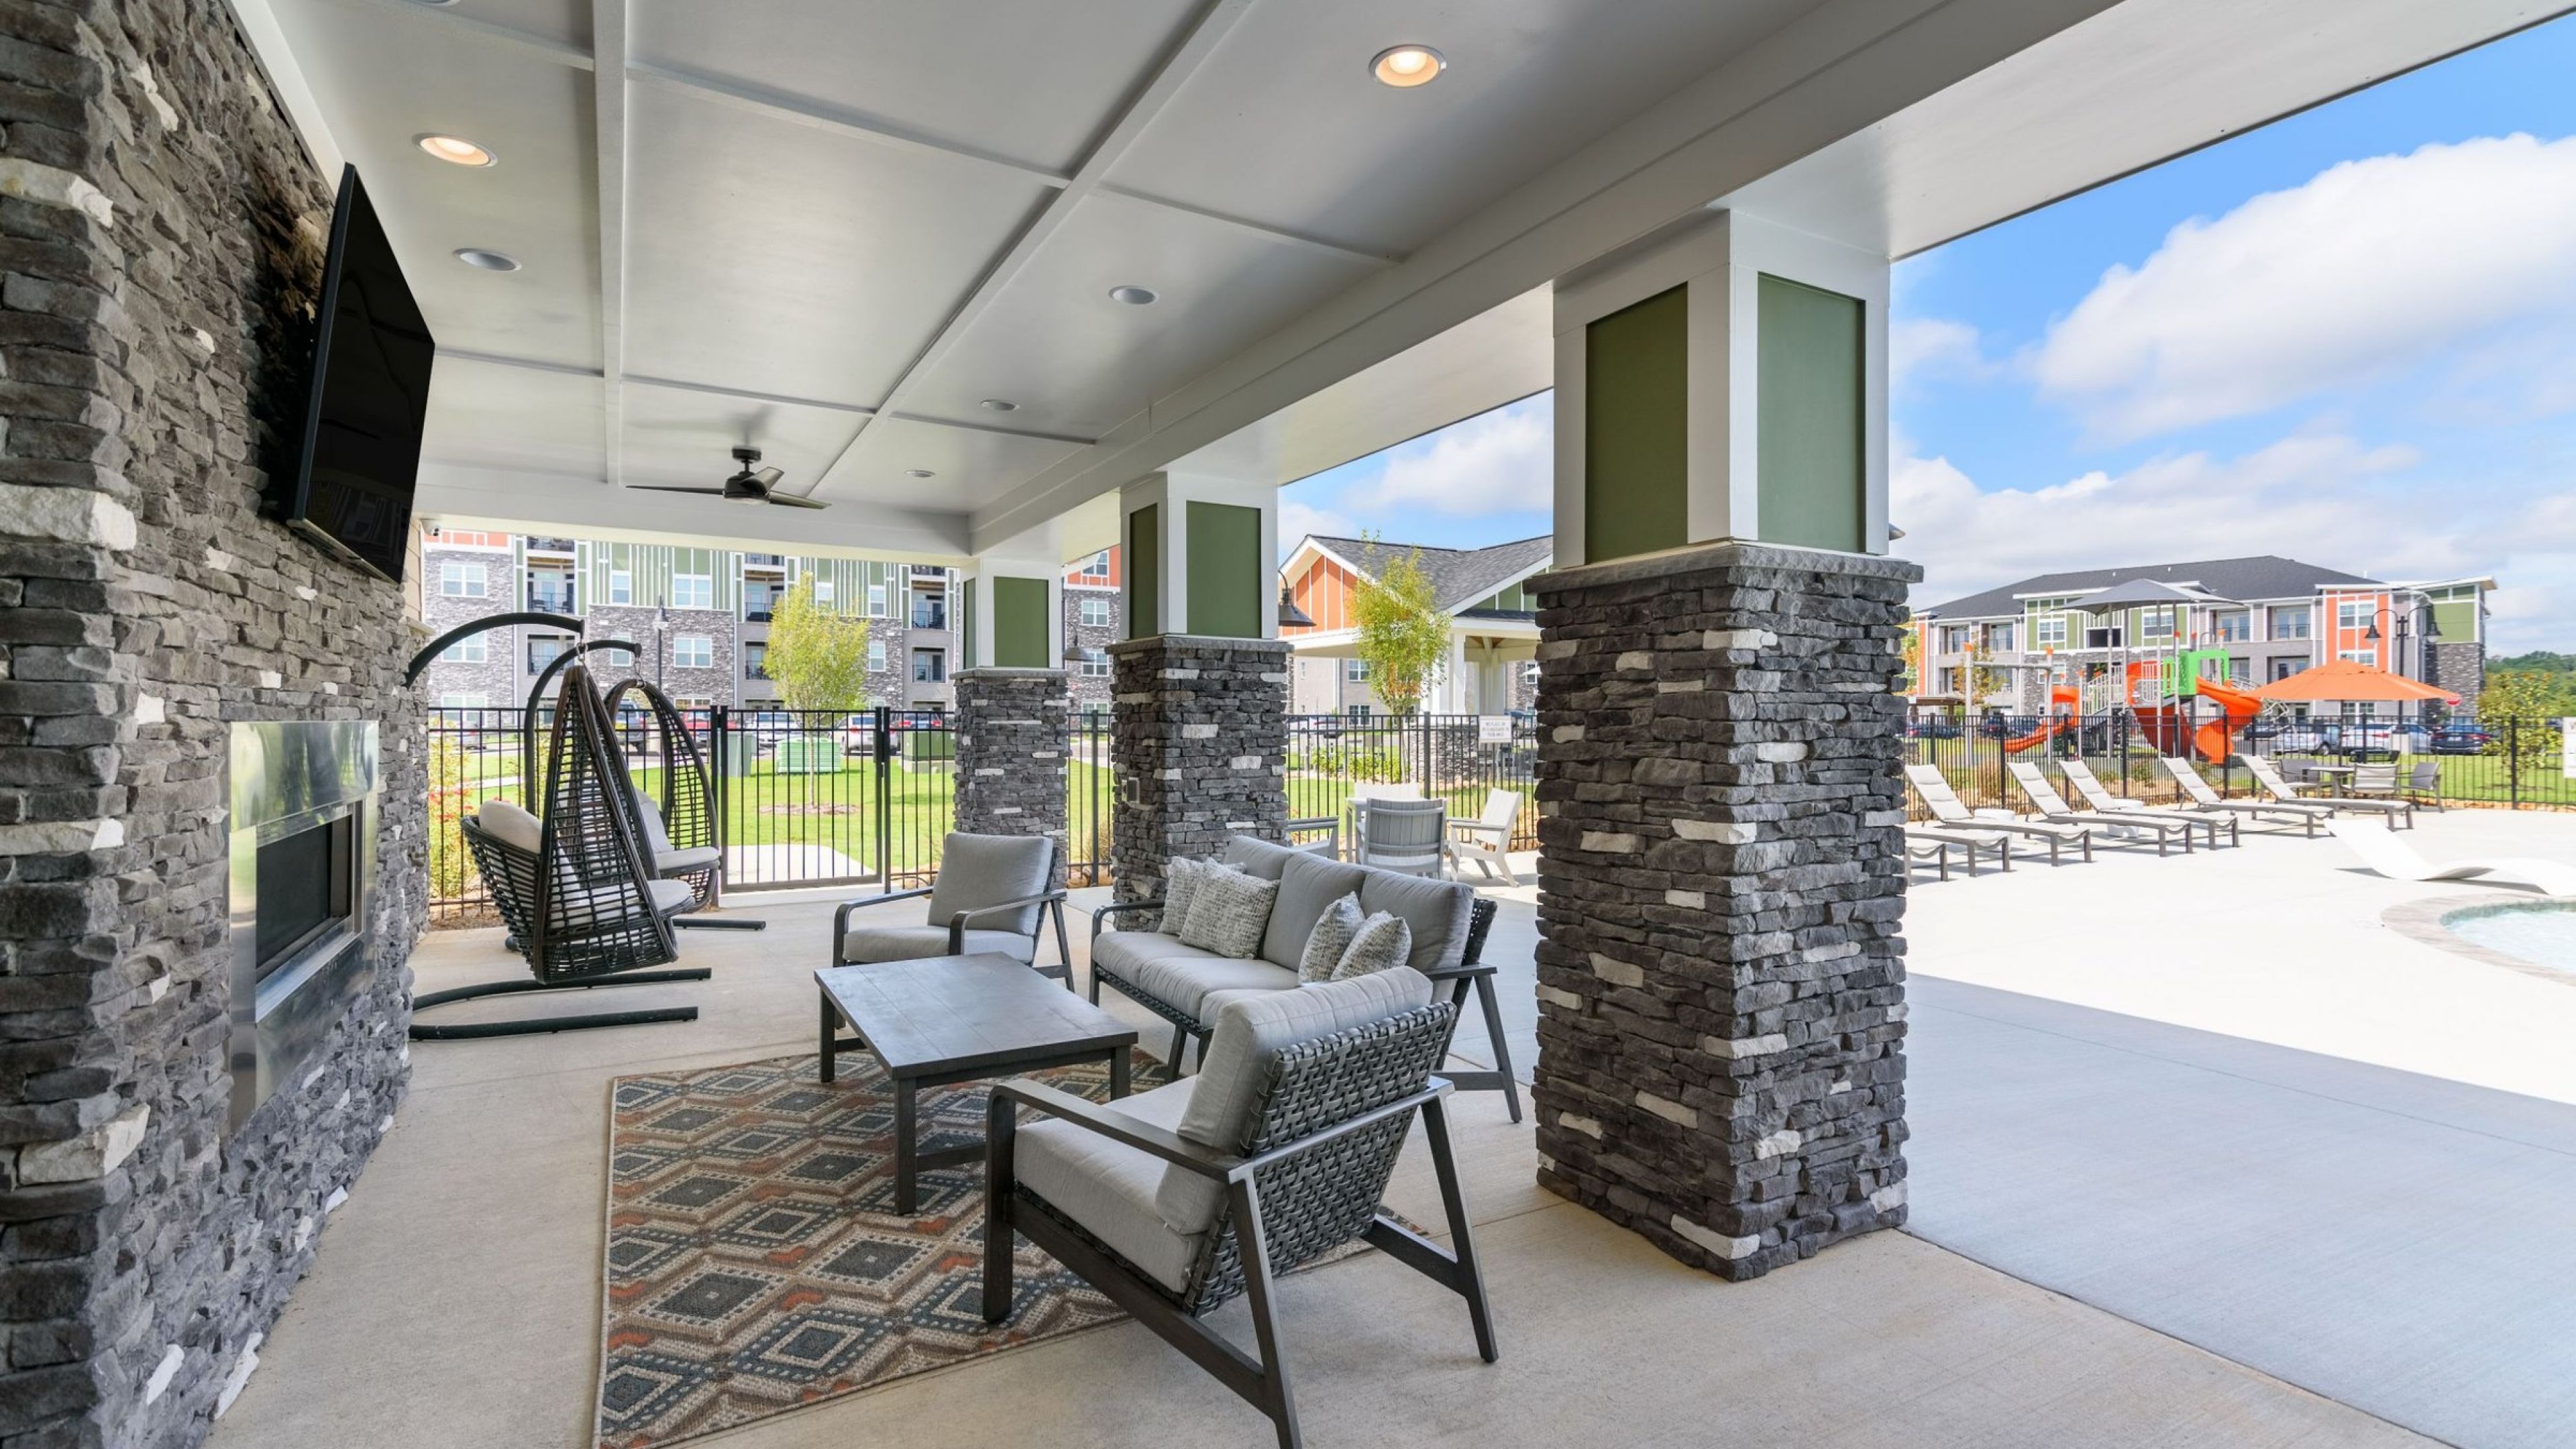 Hawthorne at the Crest resident amenity outdoor area with seating, next to large outdoor pool